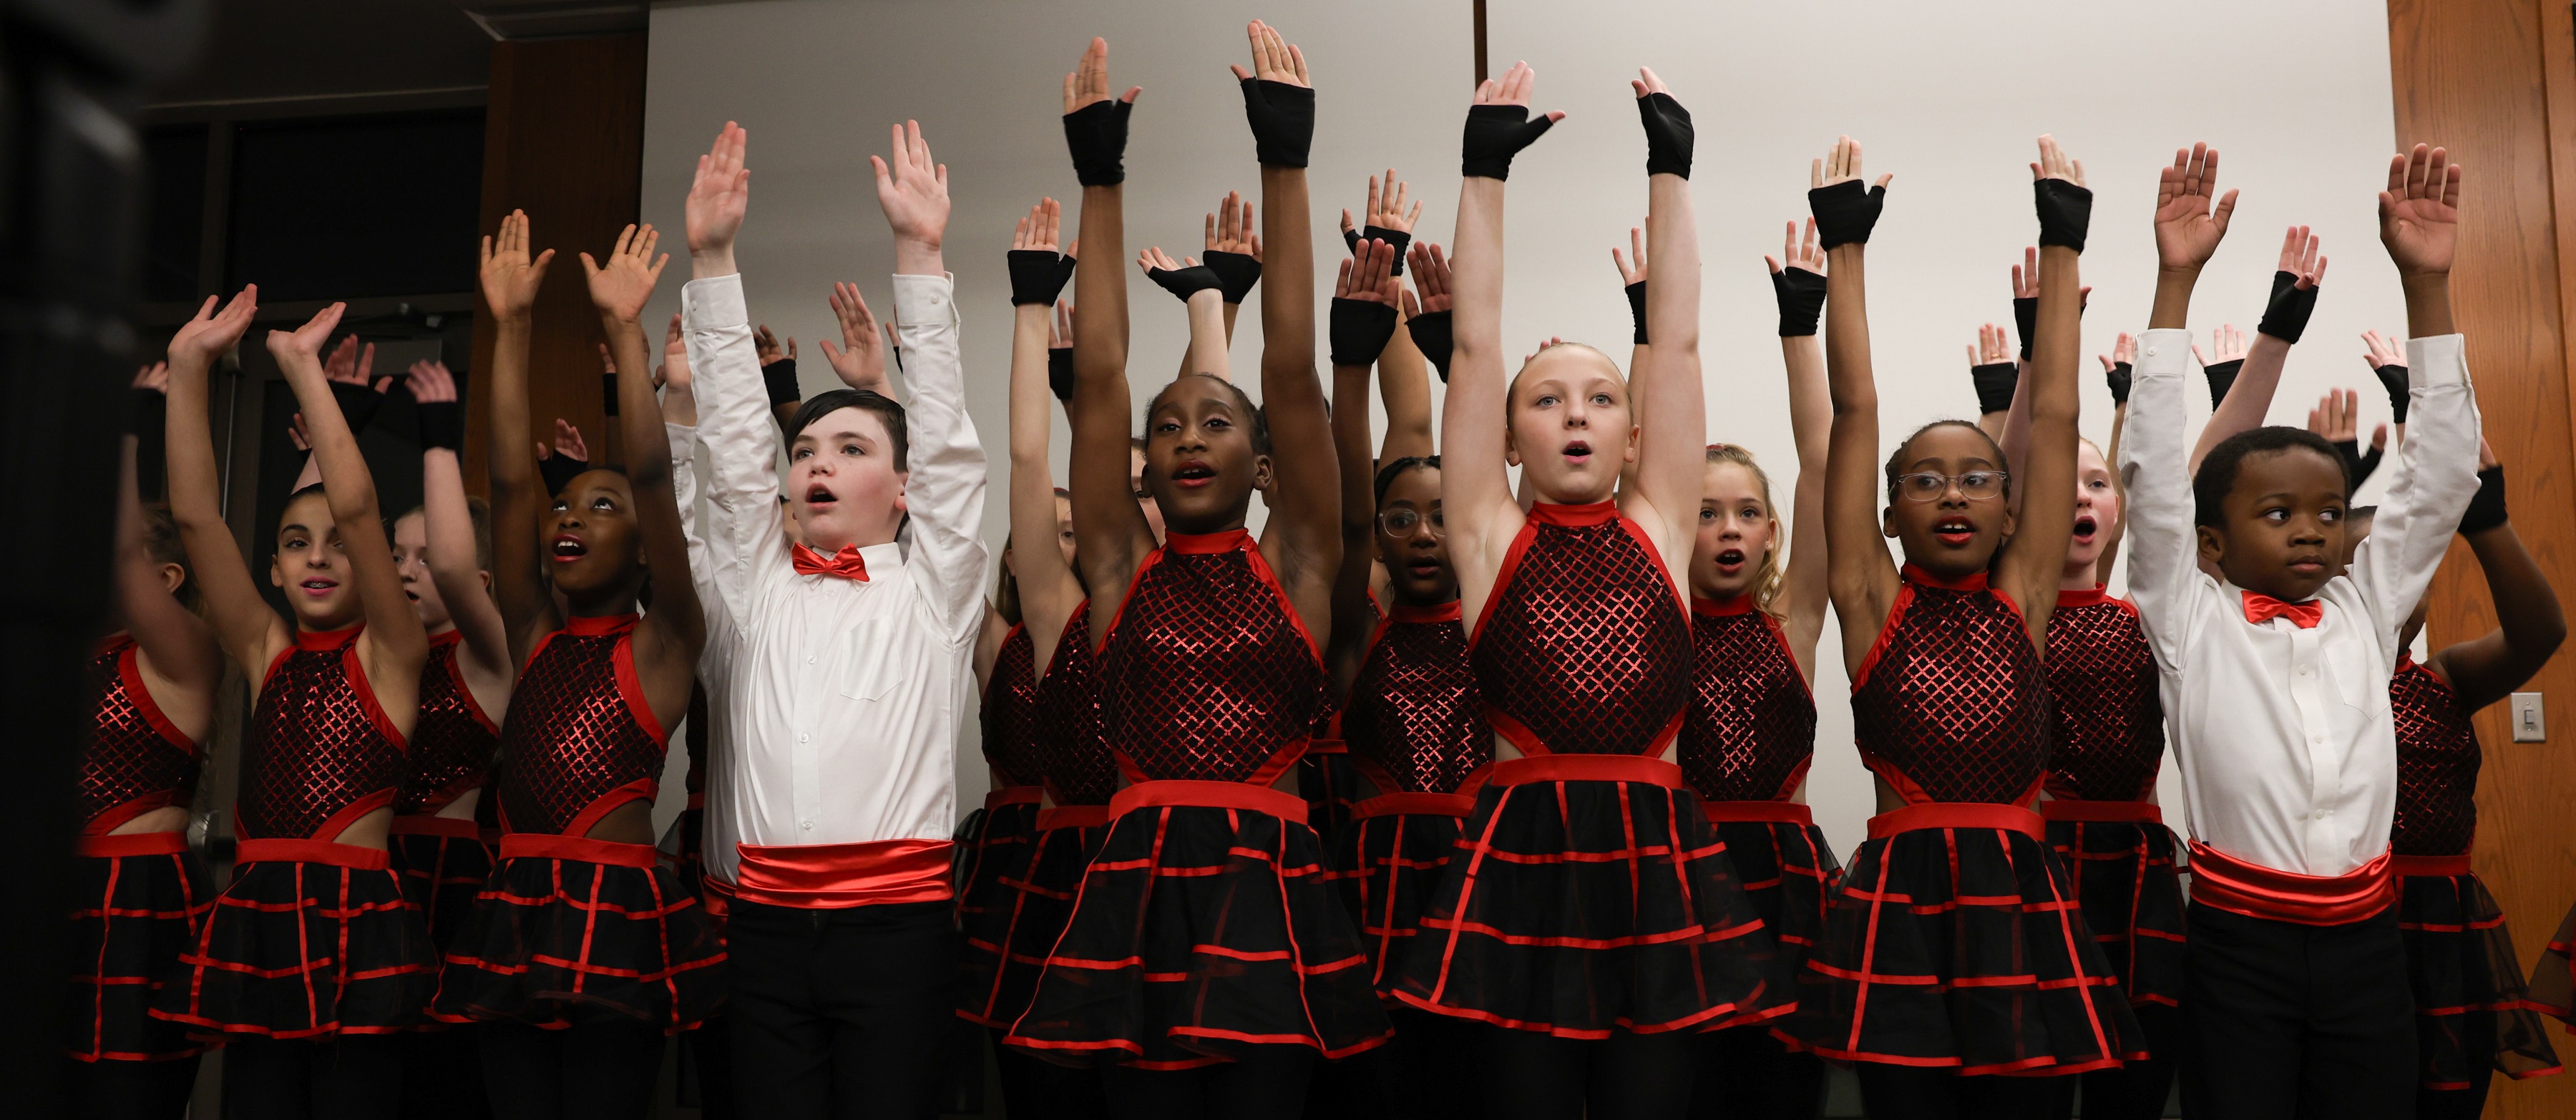 A group of students perform in black and red uniforms.